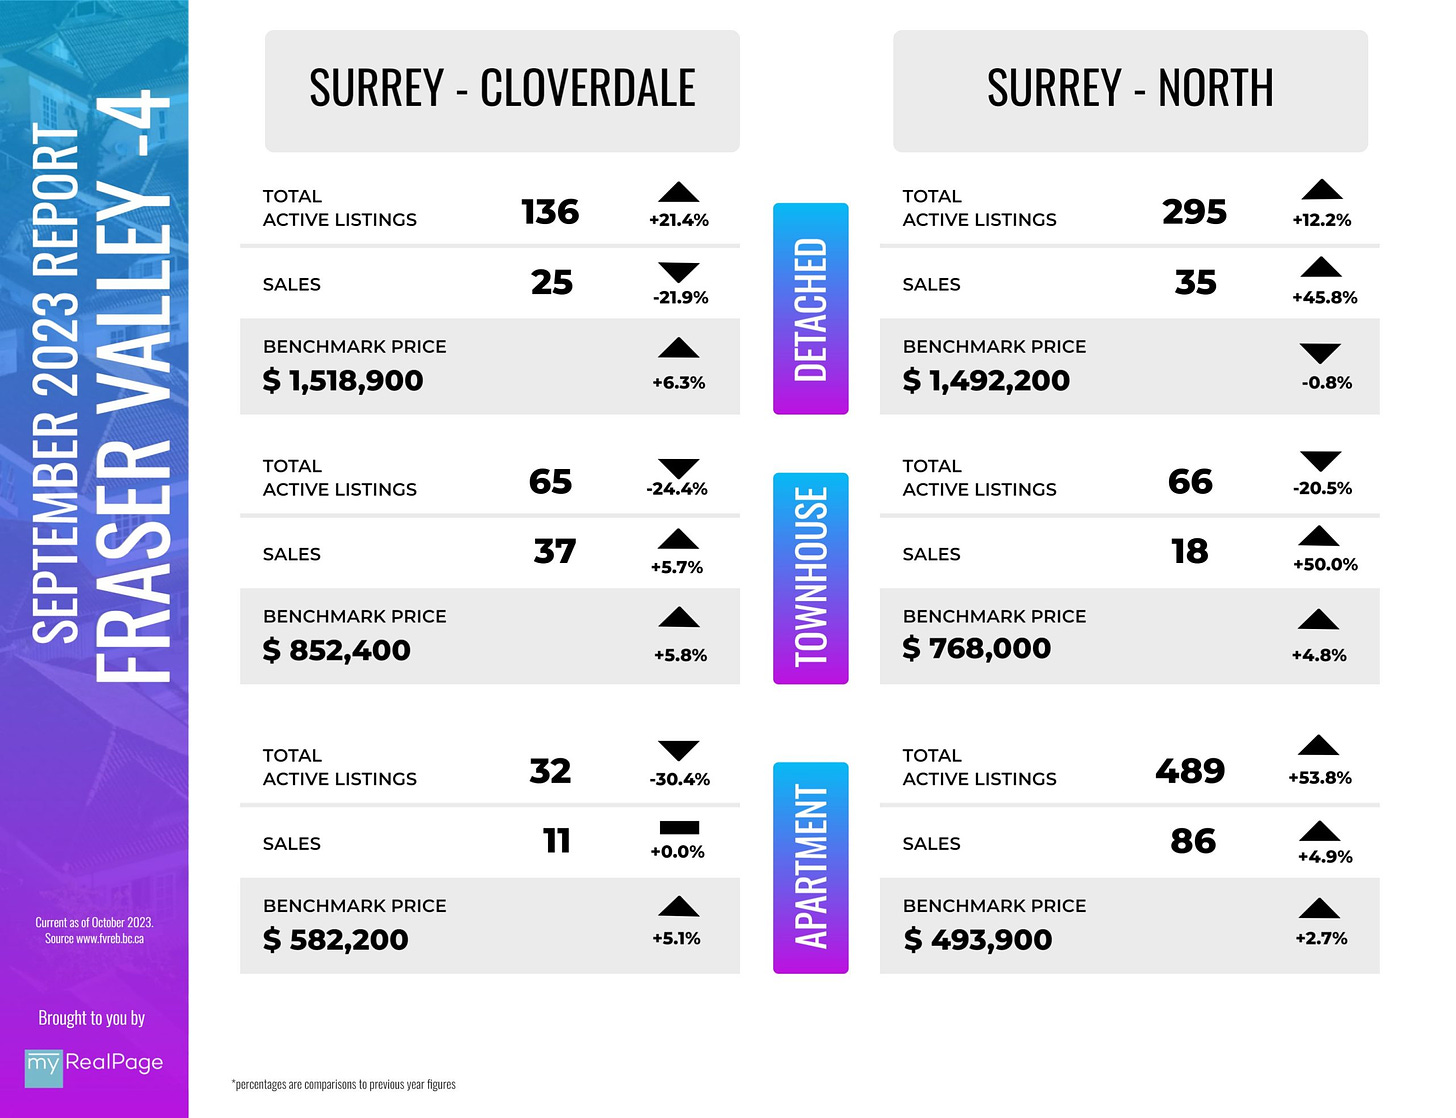 Cloverdale & North Surrey home prices